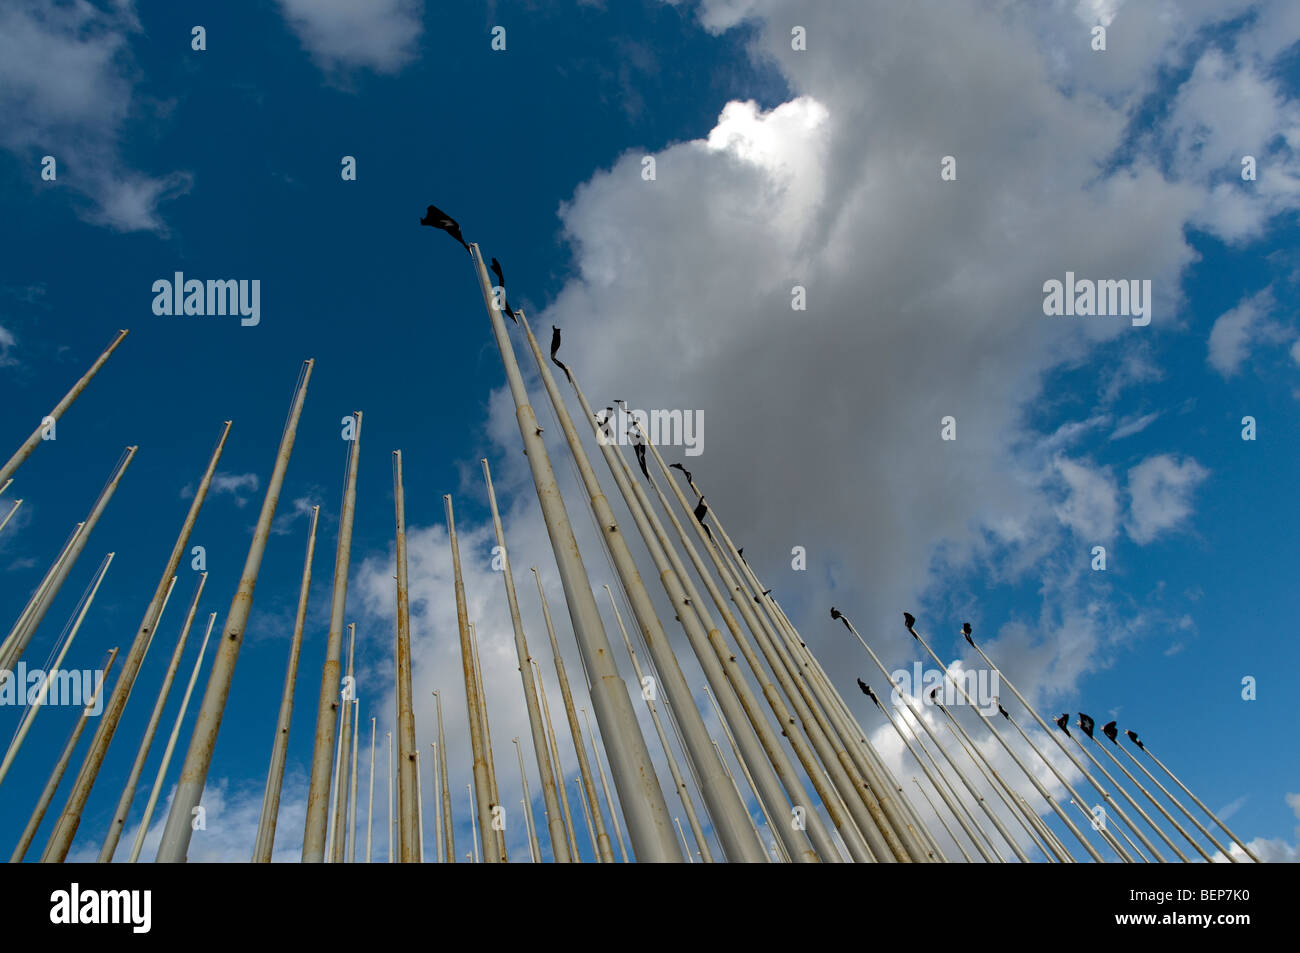 Flagpoles against a blue, but cloudy, sky outside the US Embassy in Havana, Cuba. Stock Photo